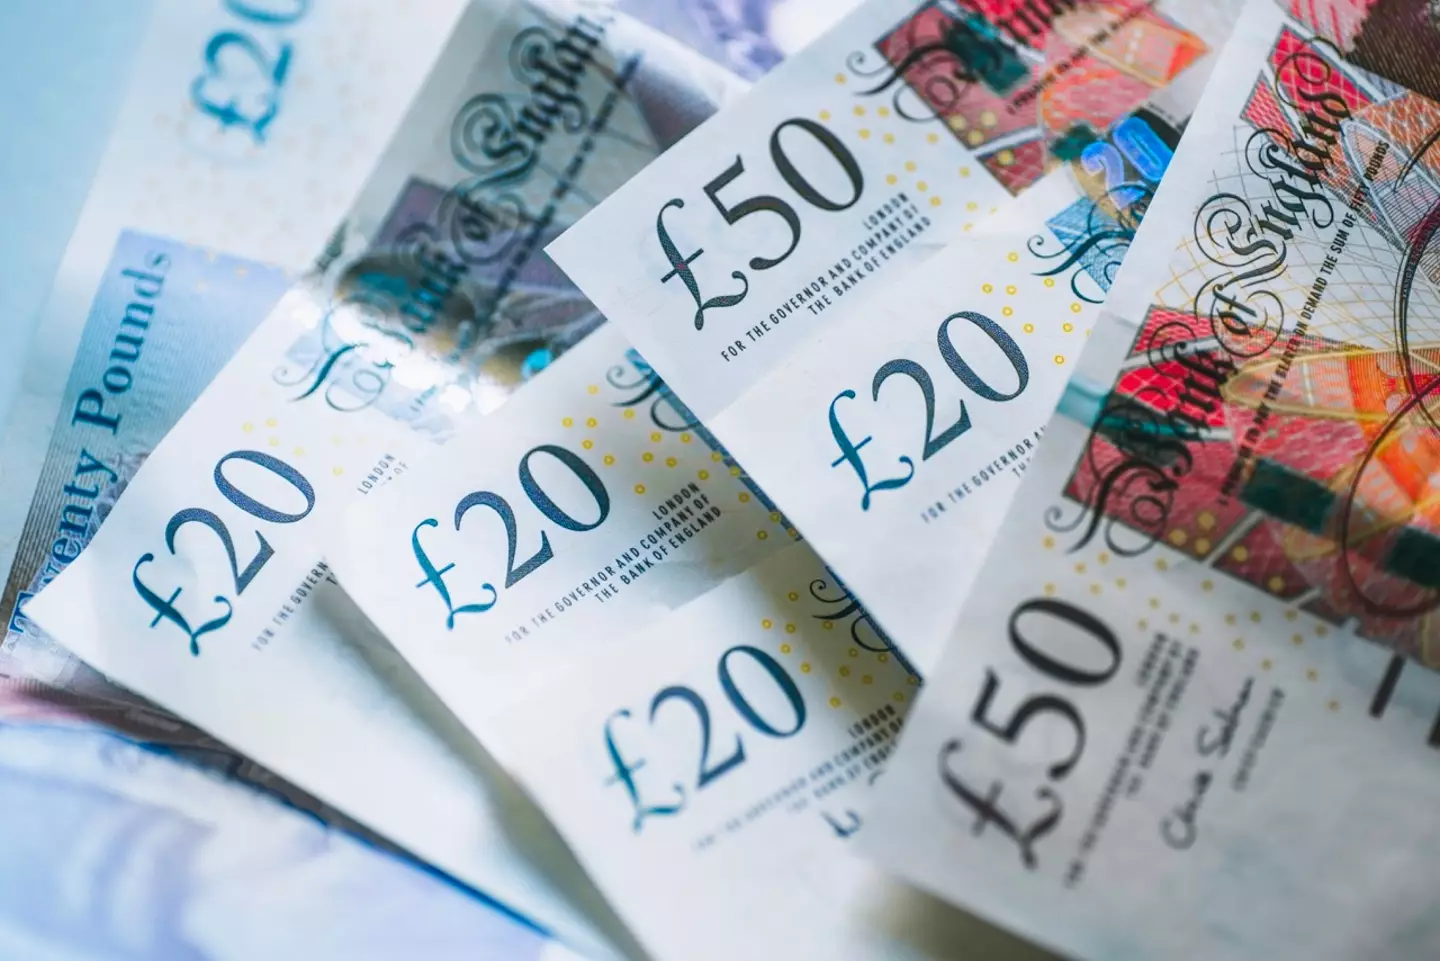 A warning has been issued after a woman unexpectedly received £17,000 from a person she had never met.